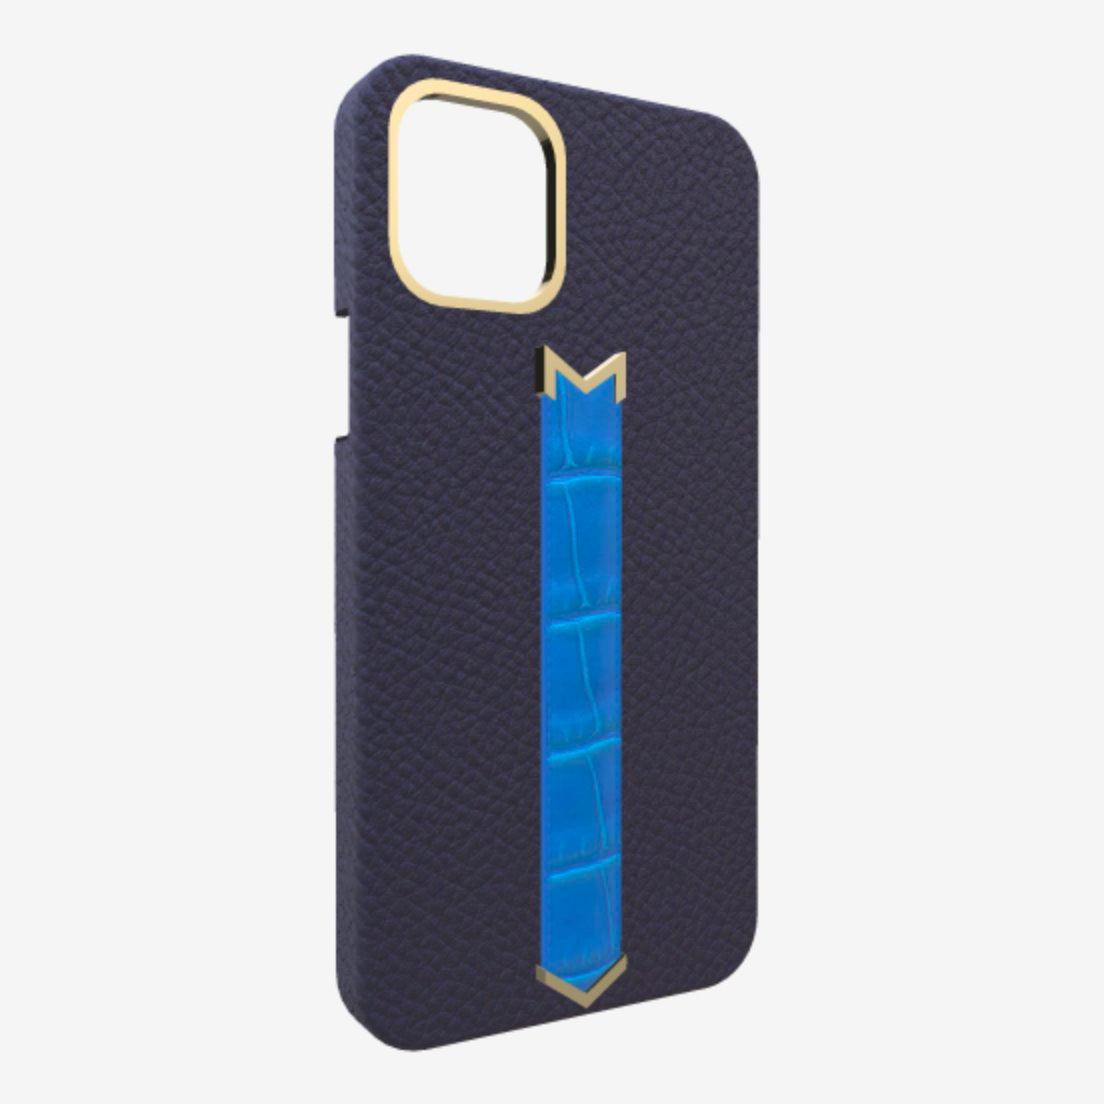 Gold Finger Strap Case for iPhone 13 Pro Max in Genuine Calfskin and Alligator Navy Blue Royal Blue 